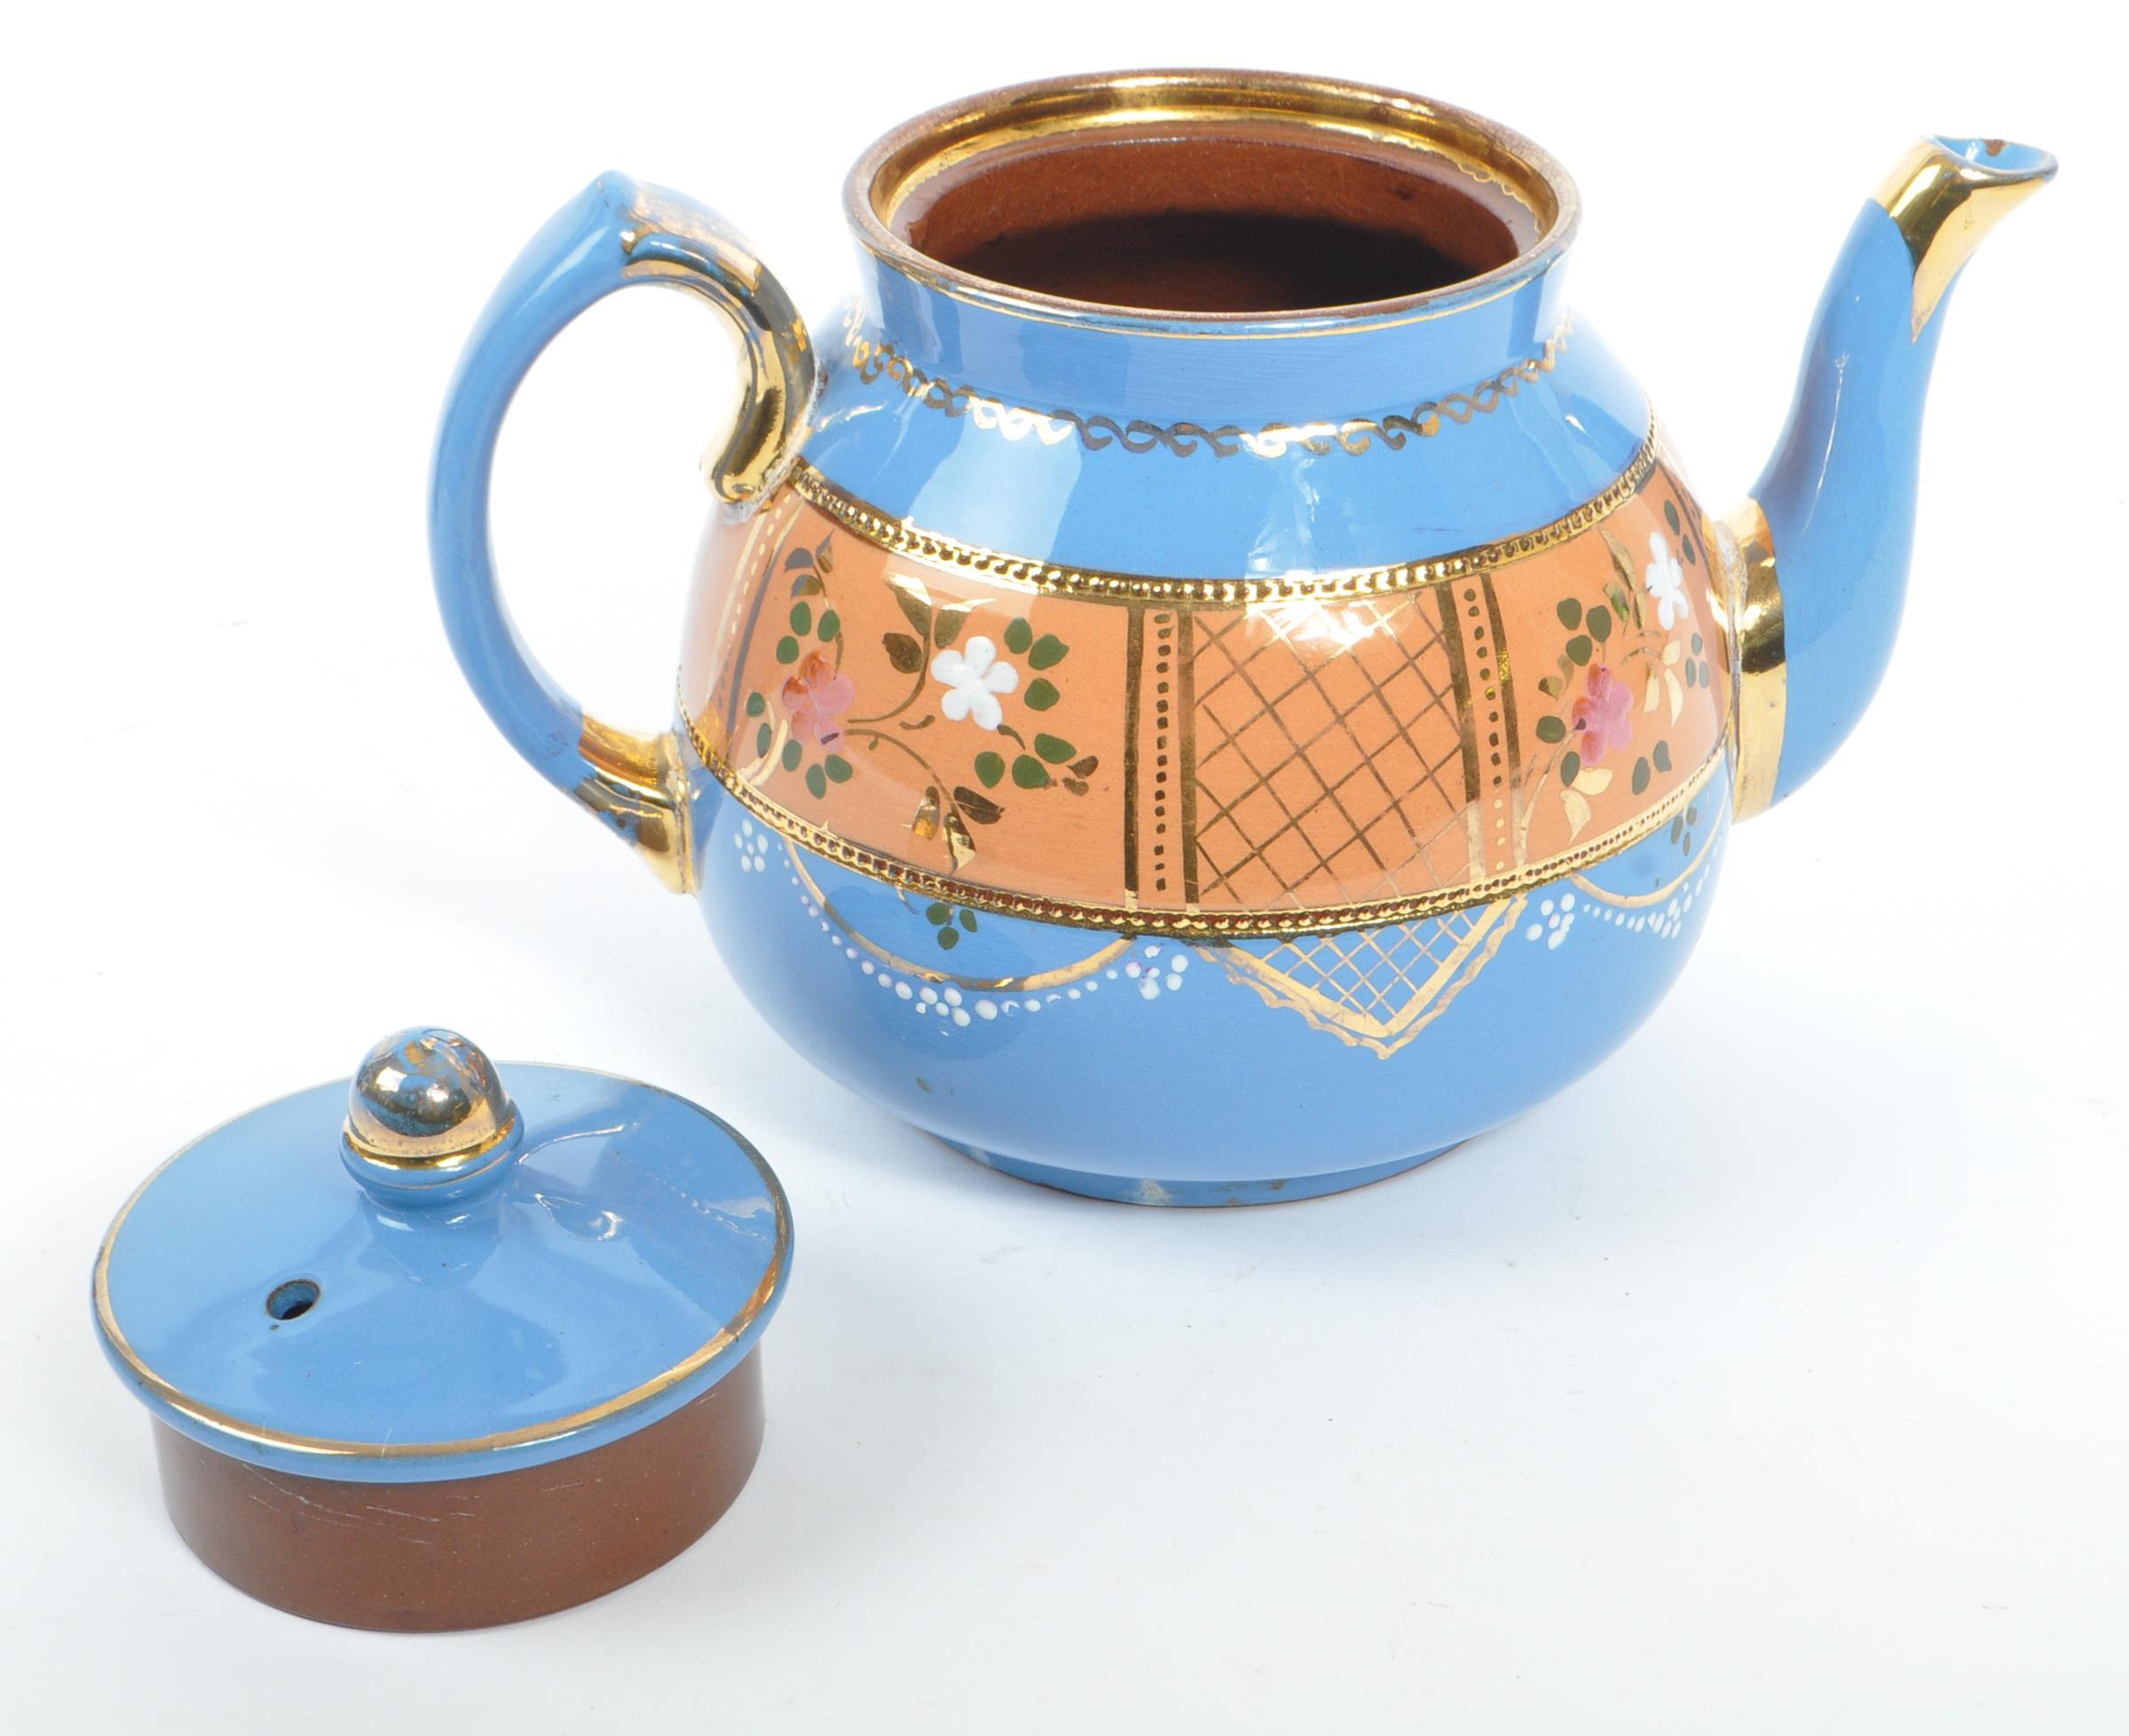 WADES - TWO HAND PAINTED DECORATED CERAMIC TEAPOTS - Image 4 of 8